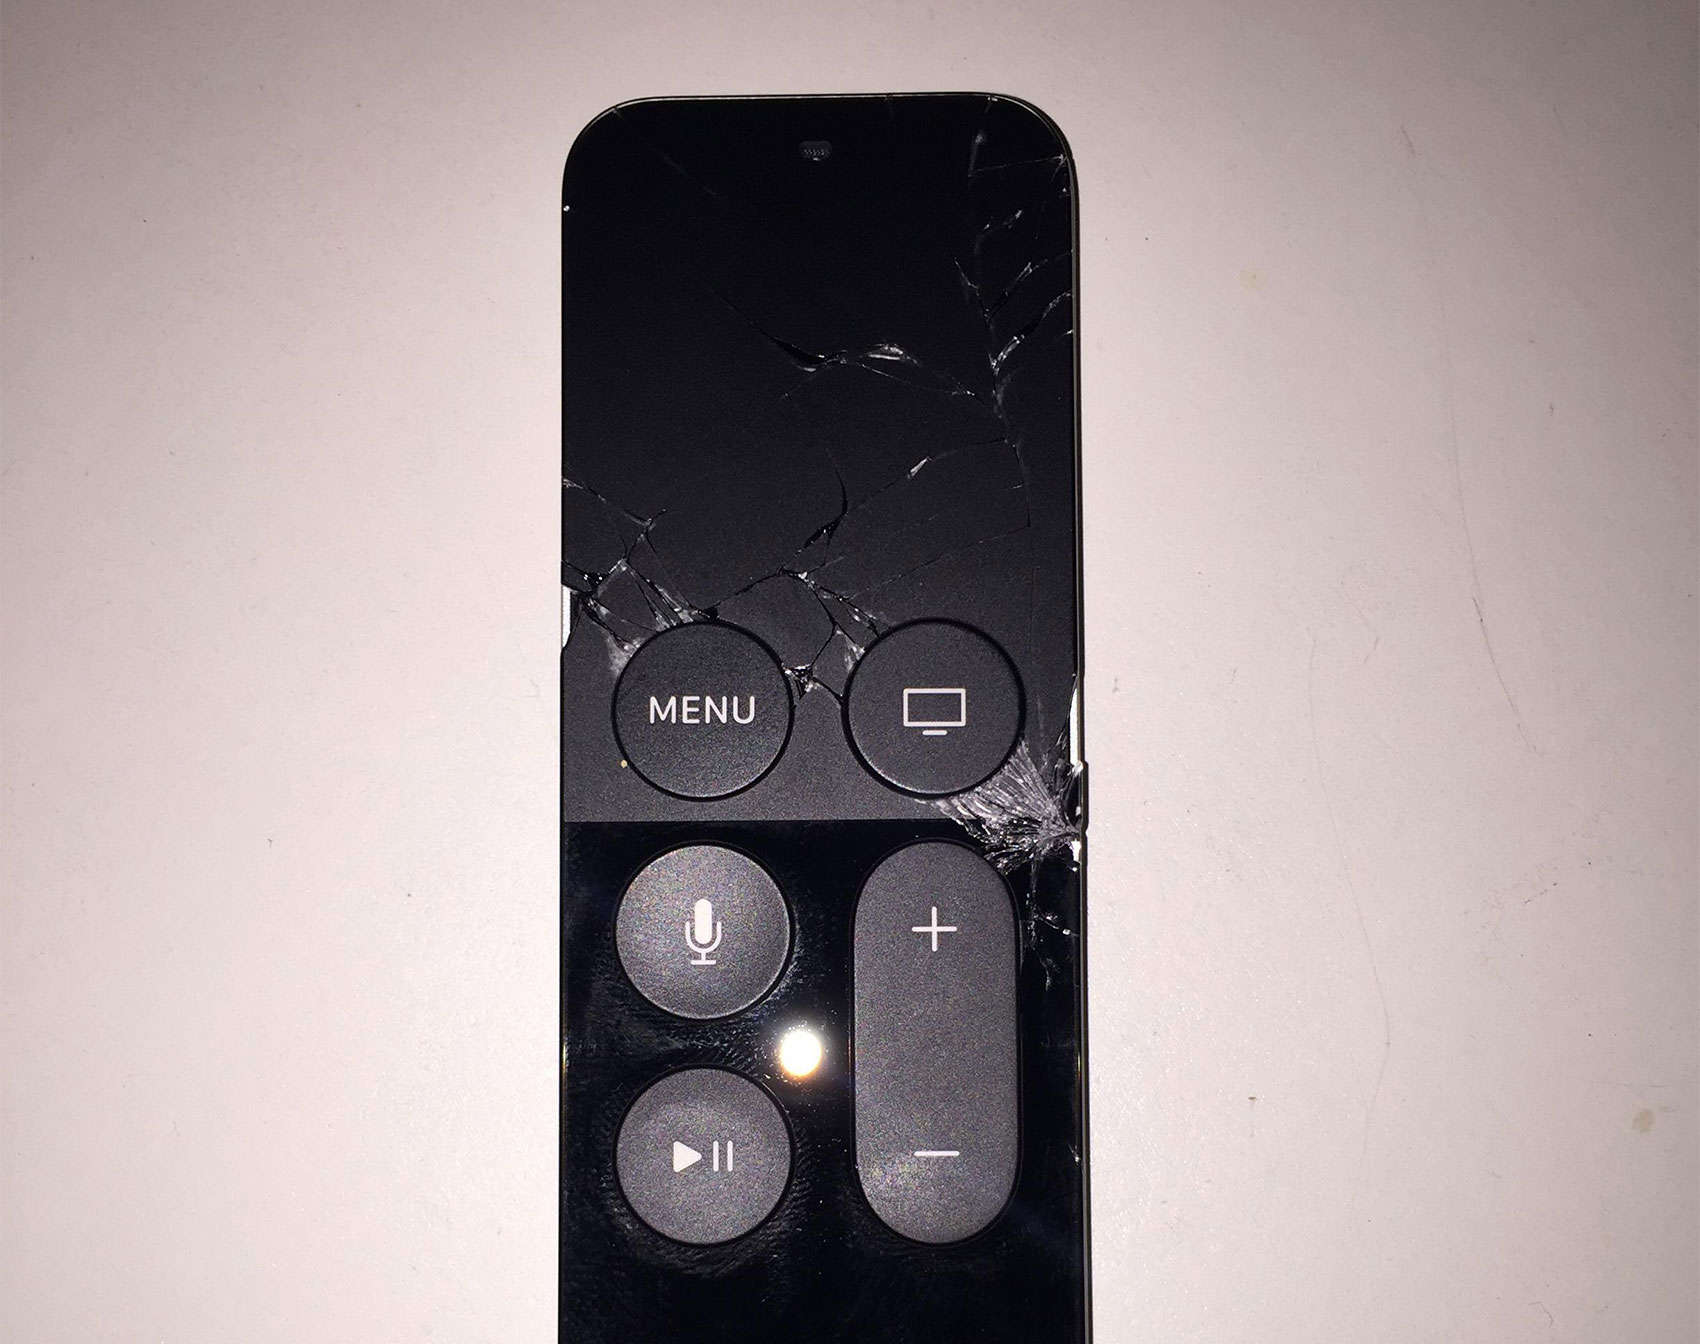 The first known casualty of the new Apple TV is this dropped remote.